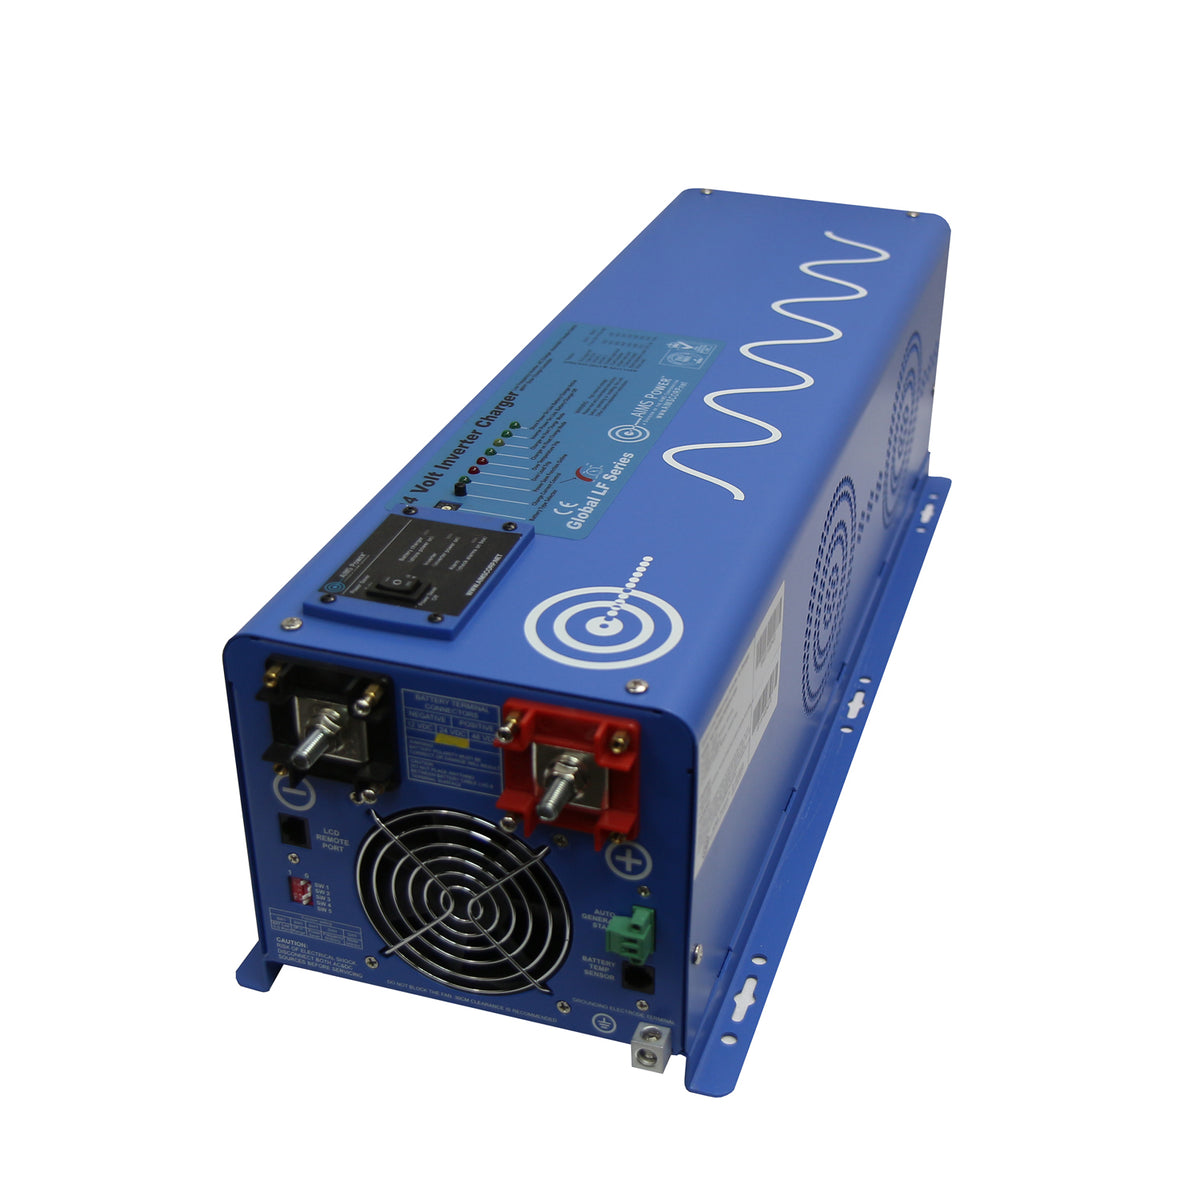 AIMS Power 8000 Watt Pure Sine Inverter Charger 48 Vdc / 240Vac Input &amp; 120/240Vac Split Phase Output ETL Listed to UL 1741